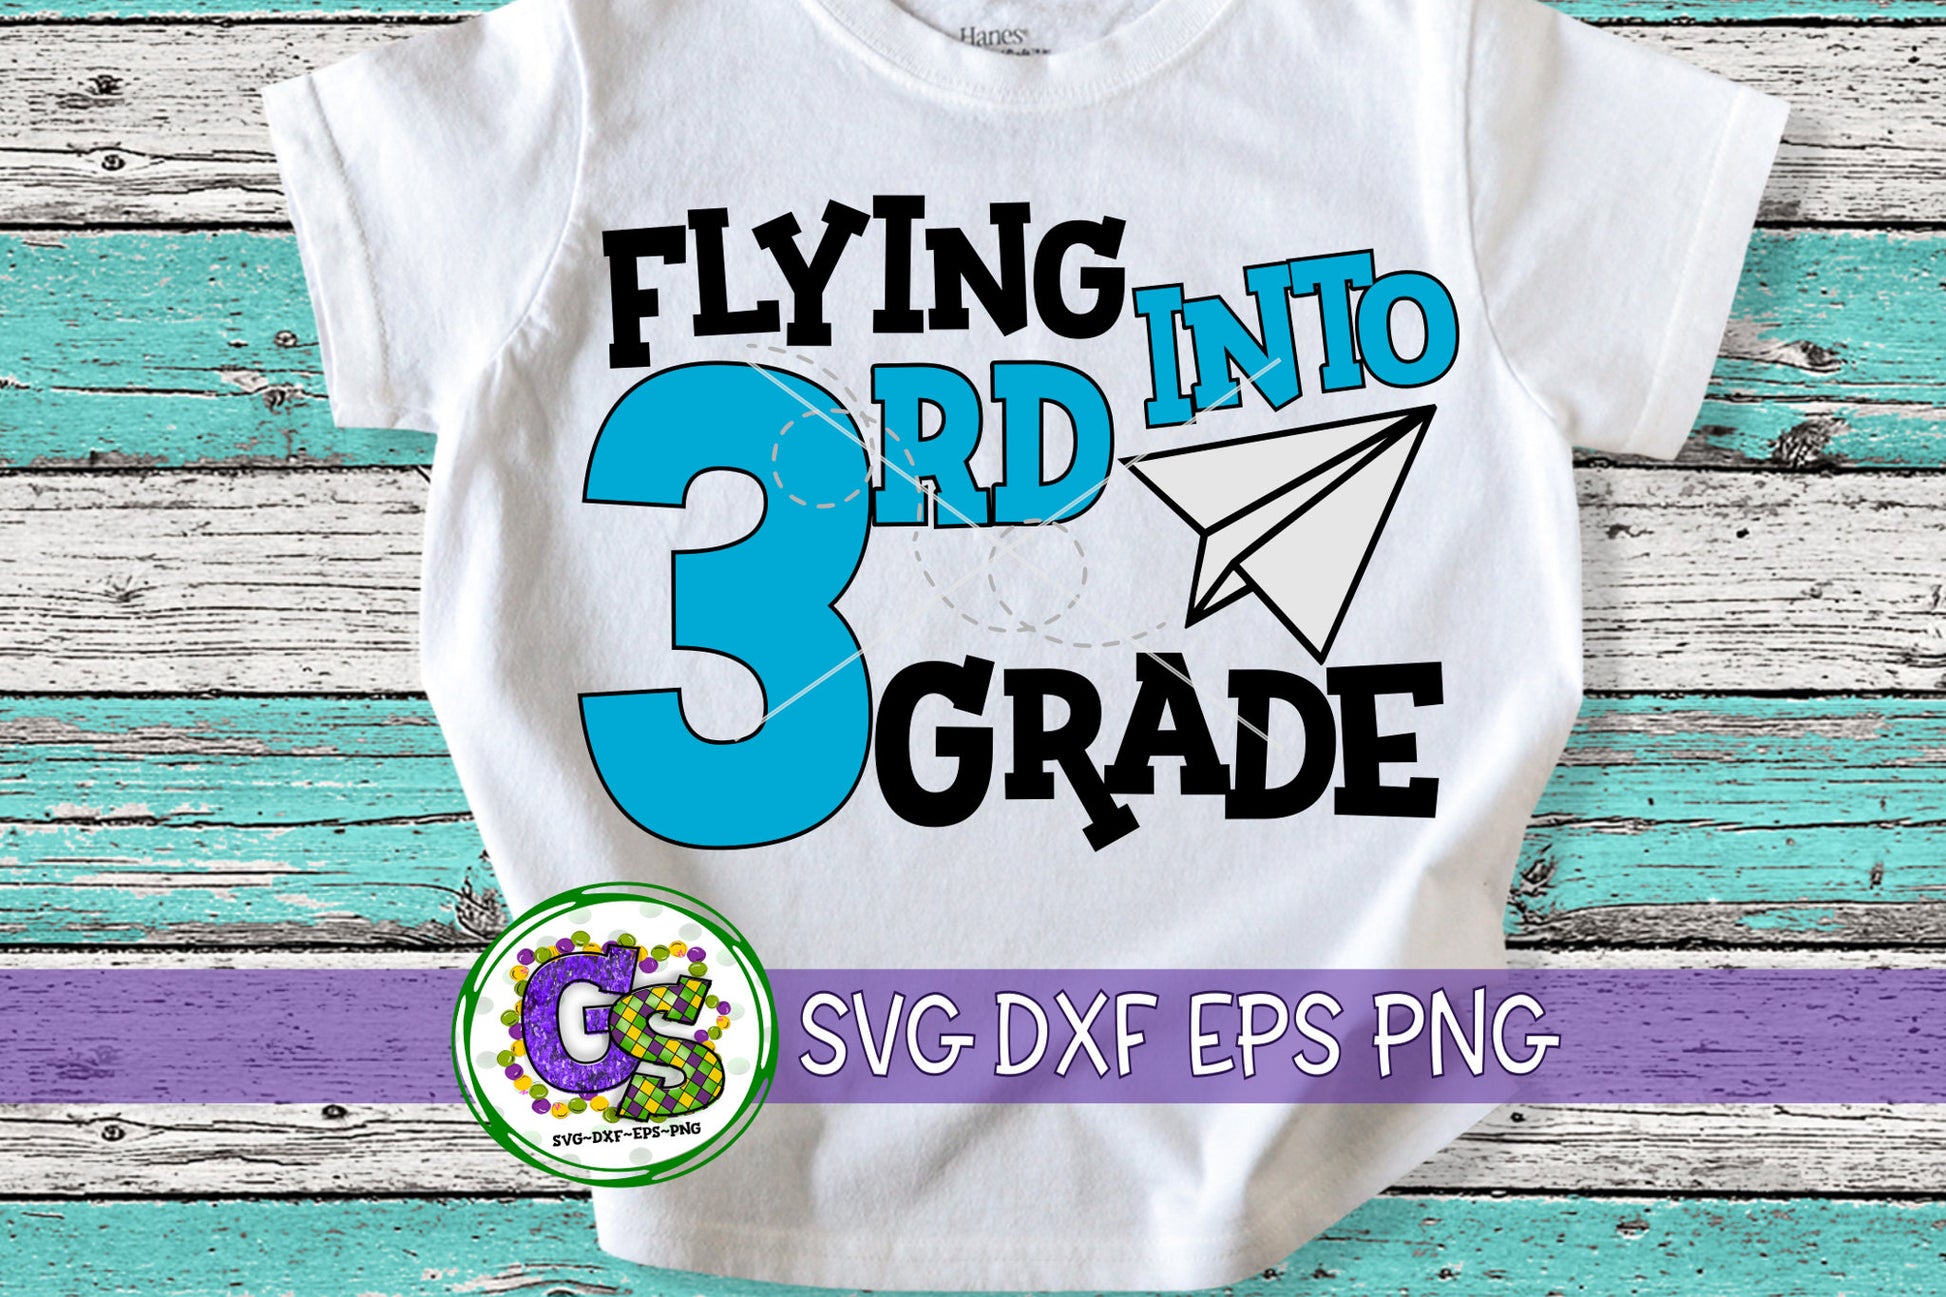 Flying Into 3rd Grade svg dxf eps png 3rd Grade SvG | Back To School | School SVG | 3rd Grade SvG | Third grade | Instant Download Cut File